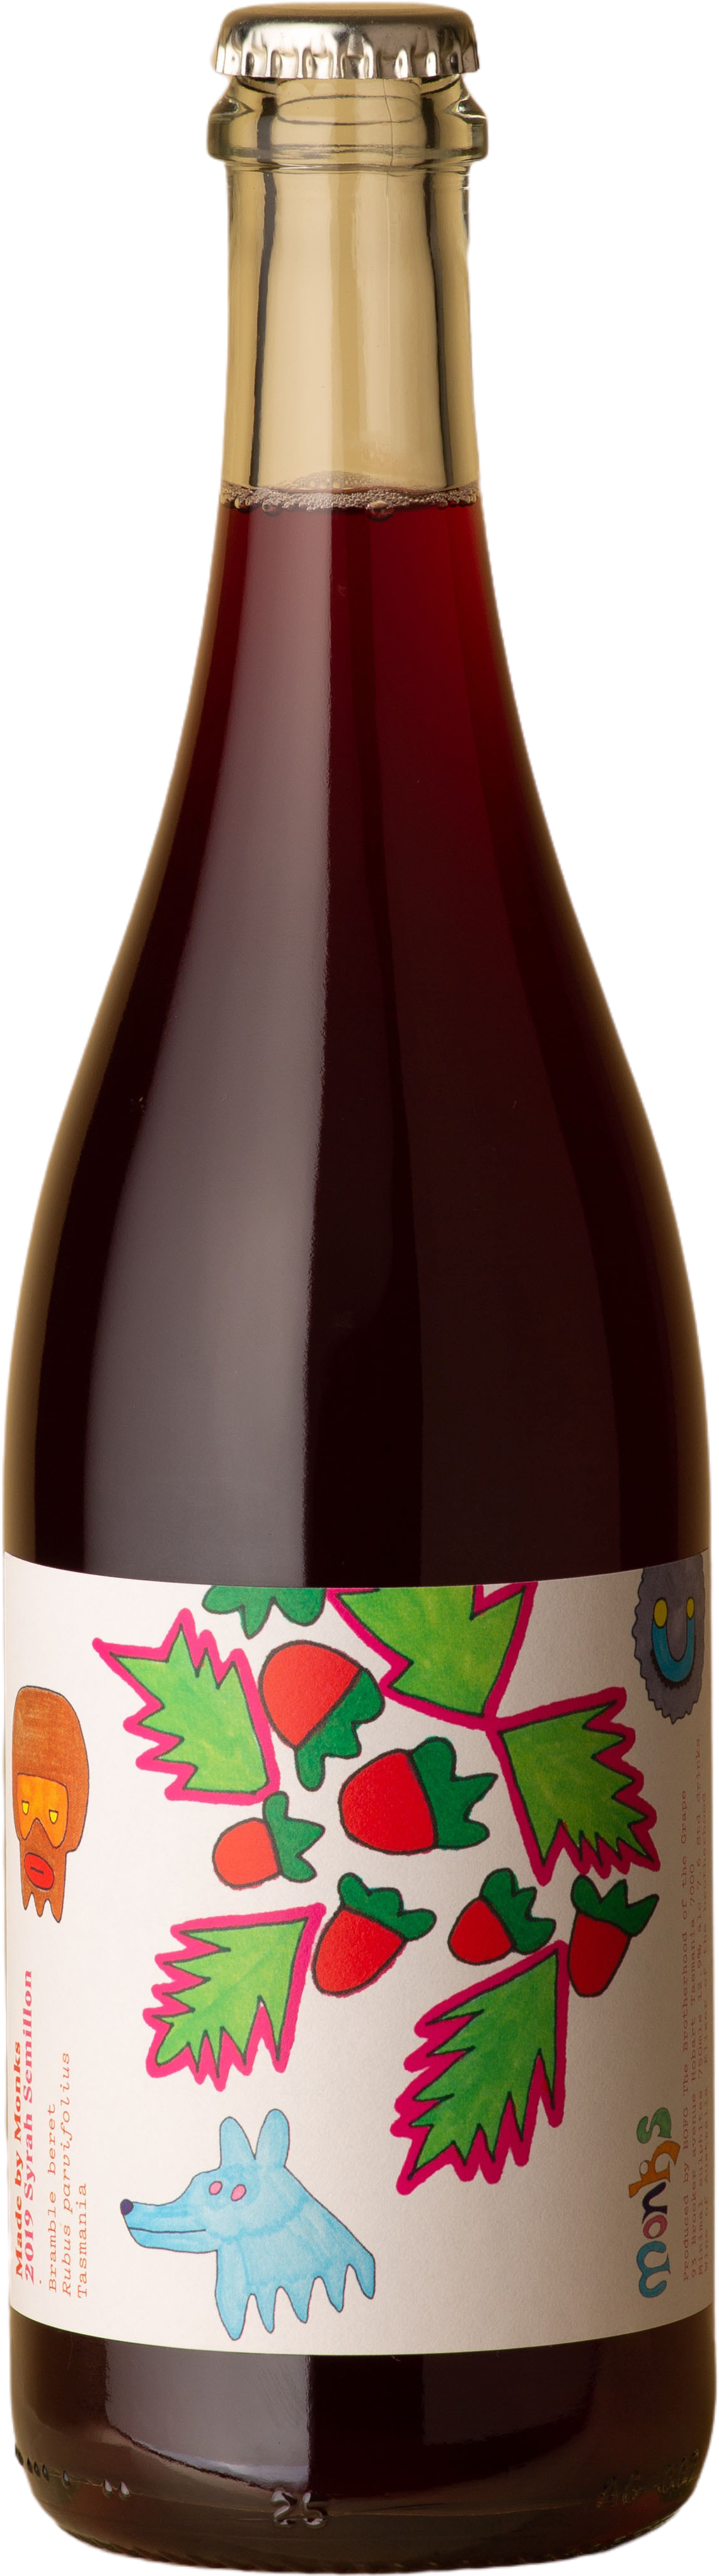 Made by Monks - Syrah / Semillon 2019 Red Wine